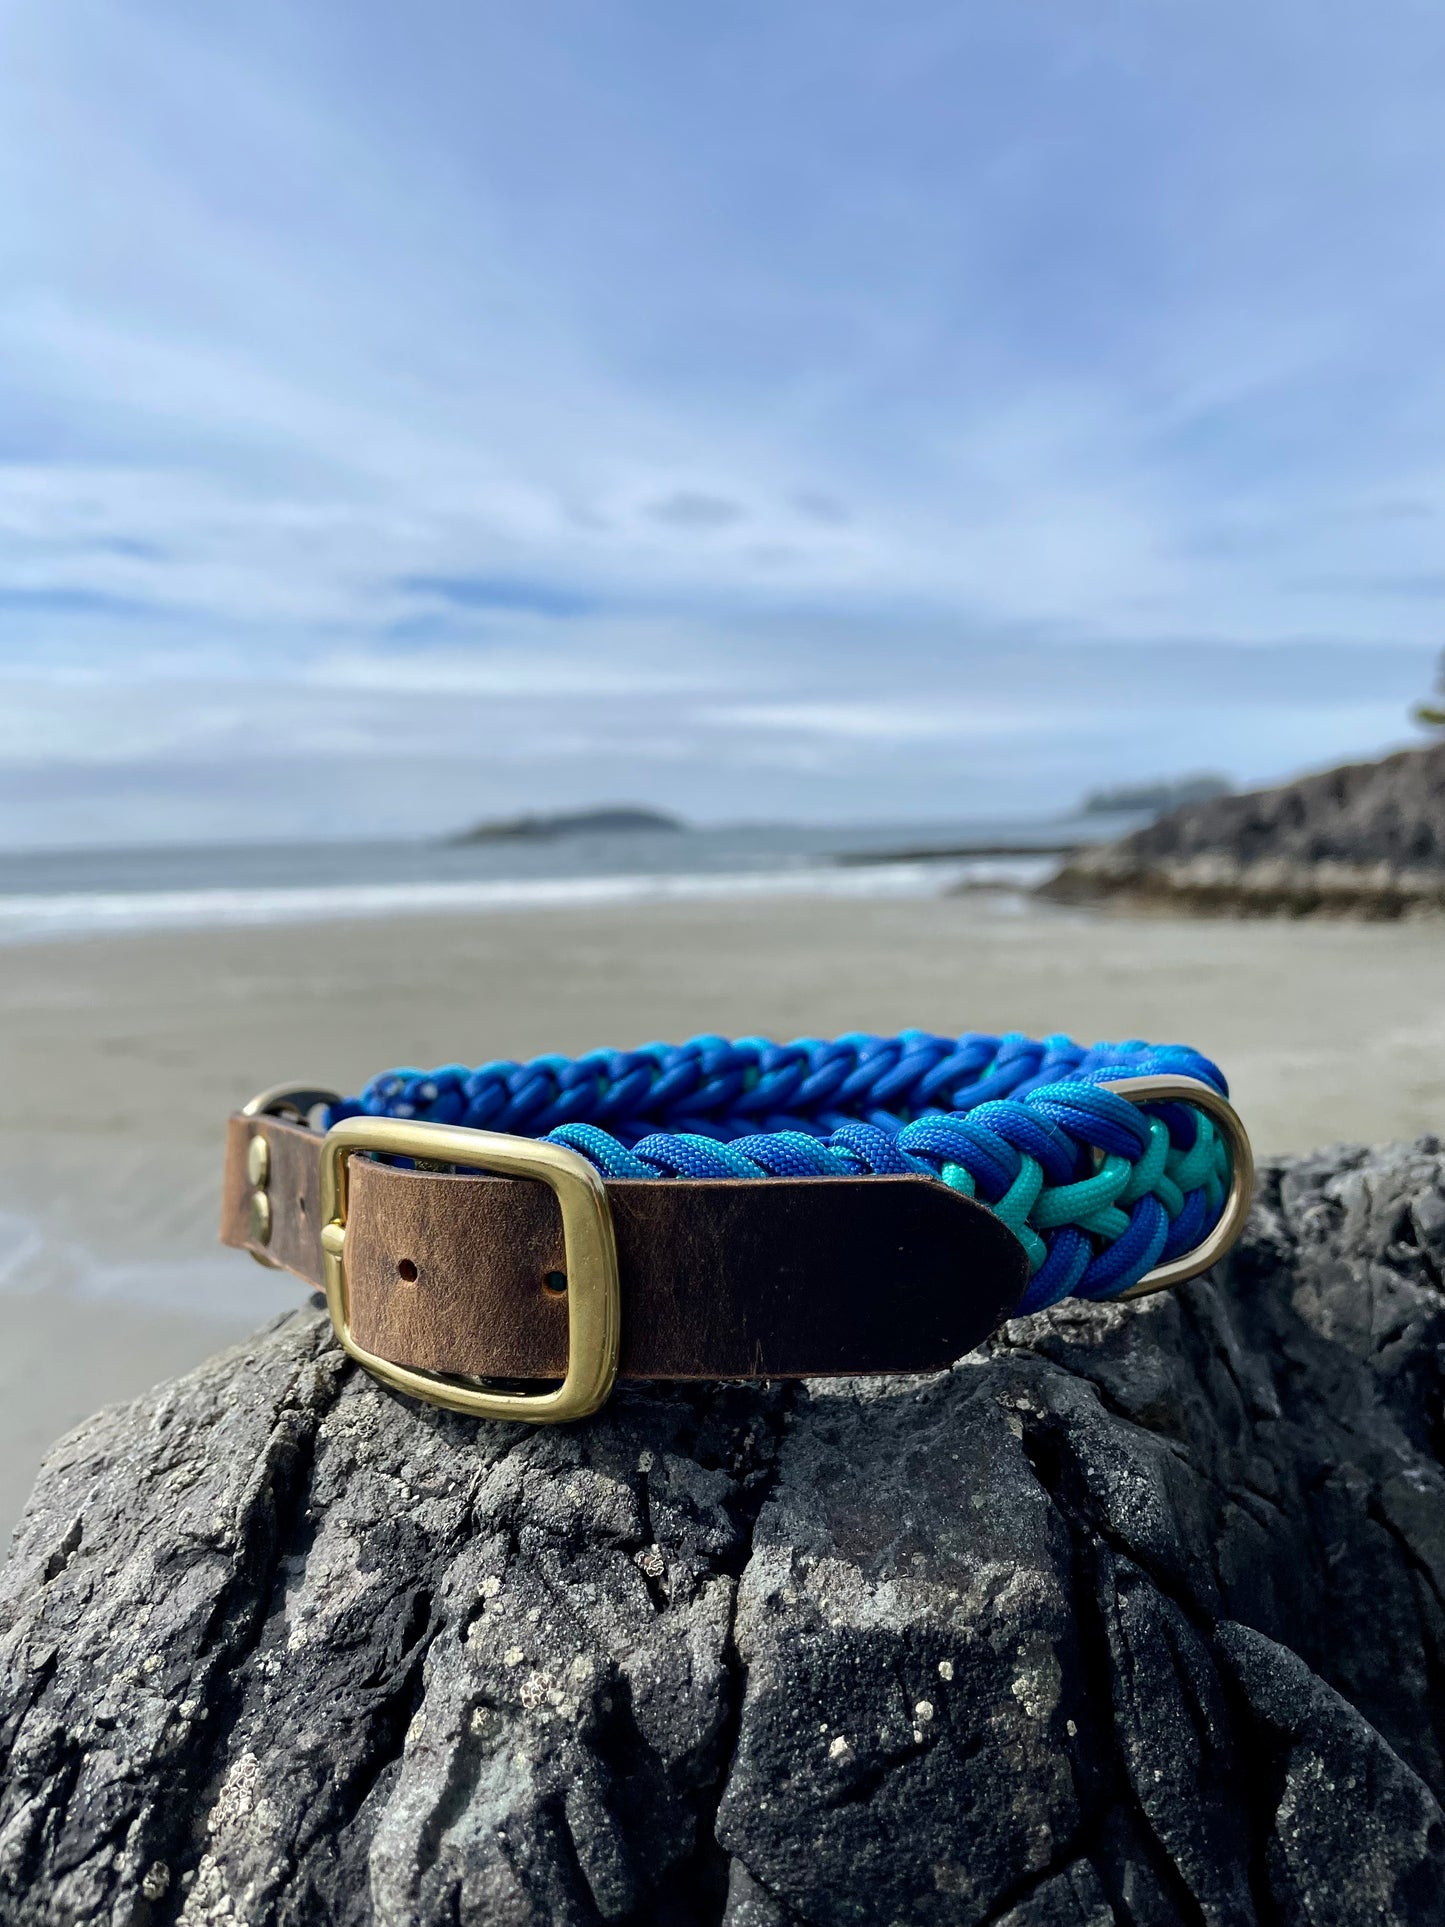 Premium Teal and Blue Paracord Dog Collar with Gold hardware and leather or Biothane belt On Beach In Tofino